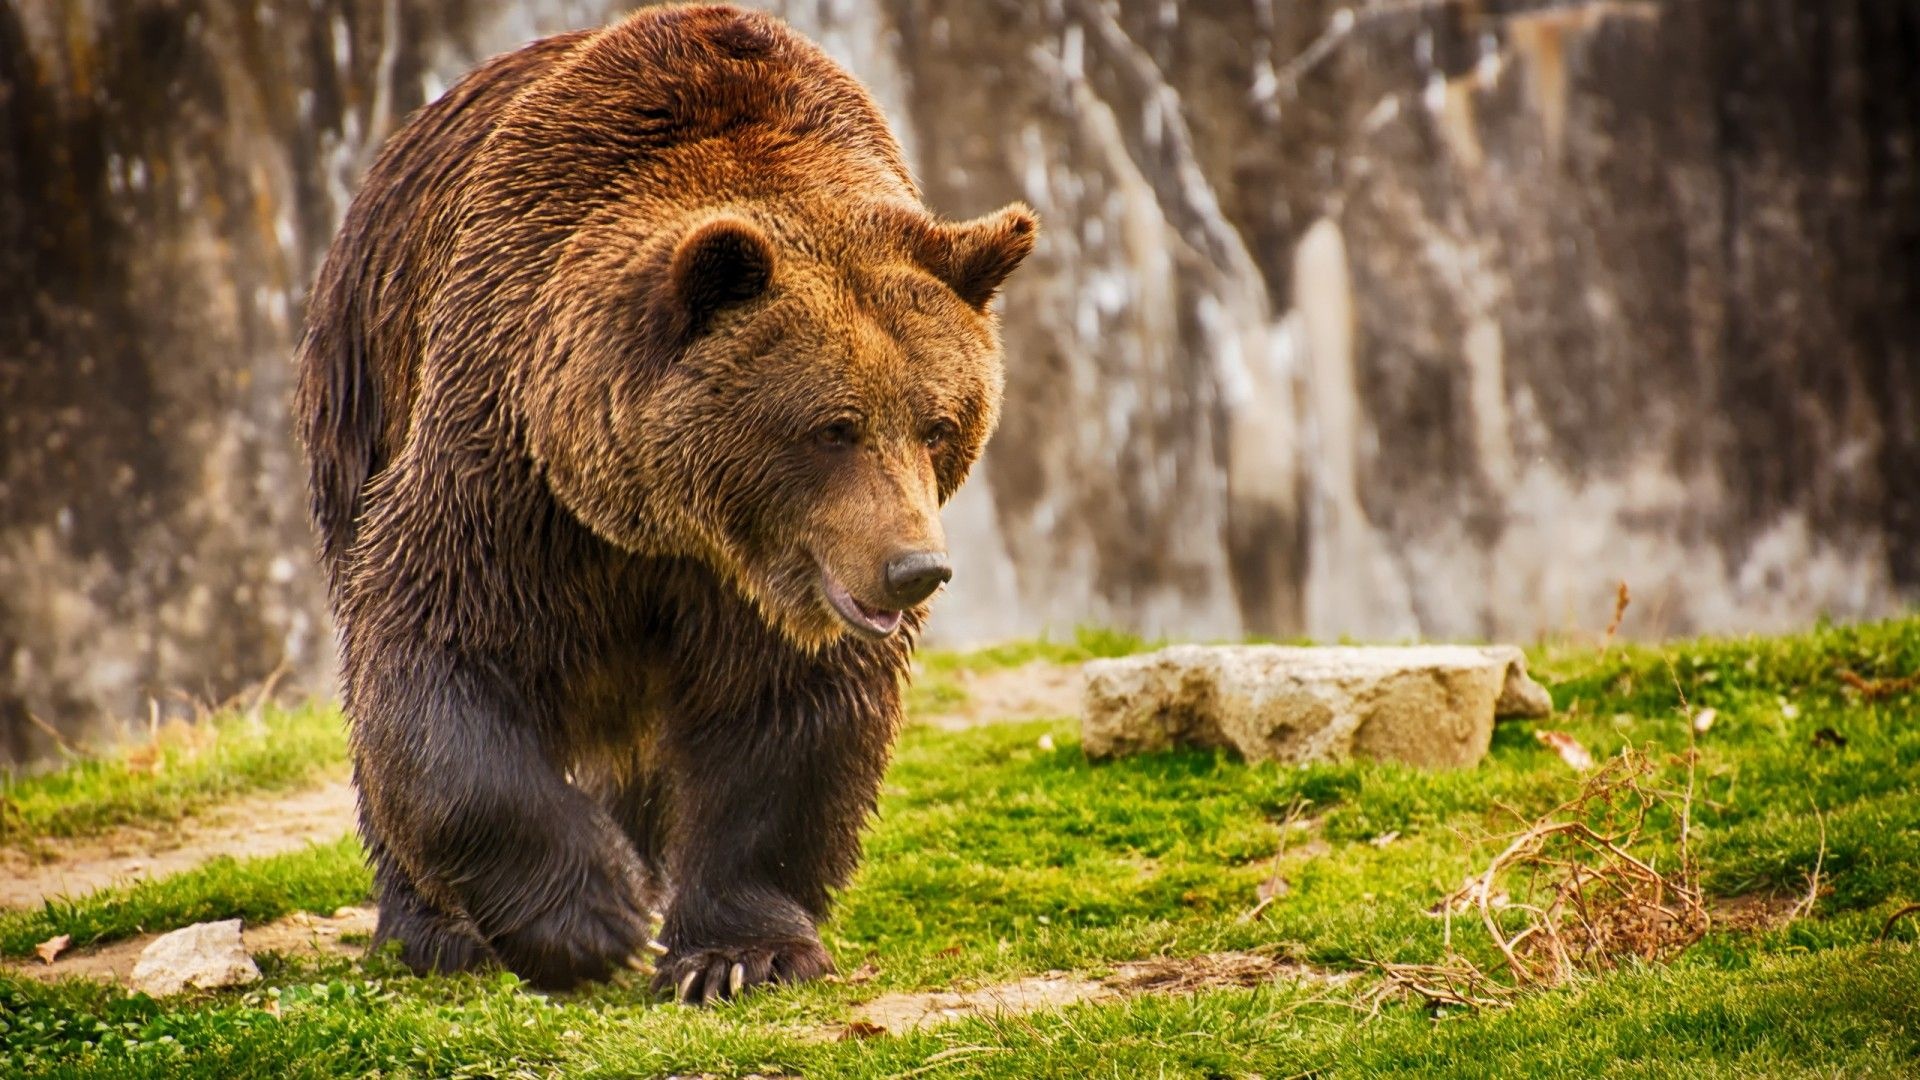 Brown bear's glory, Wildlife photography, Nature's beauty, Free high-quality wallpapers, 1920x1080 Full HD Desktop